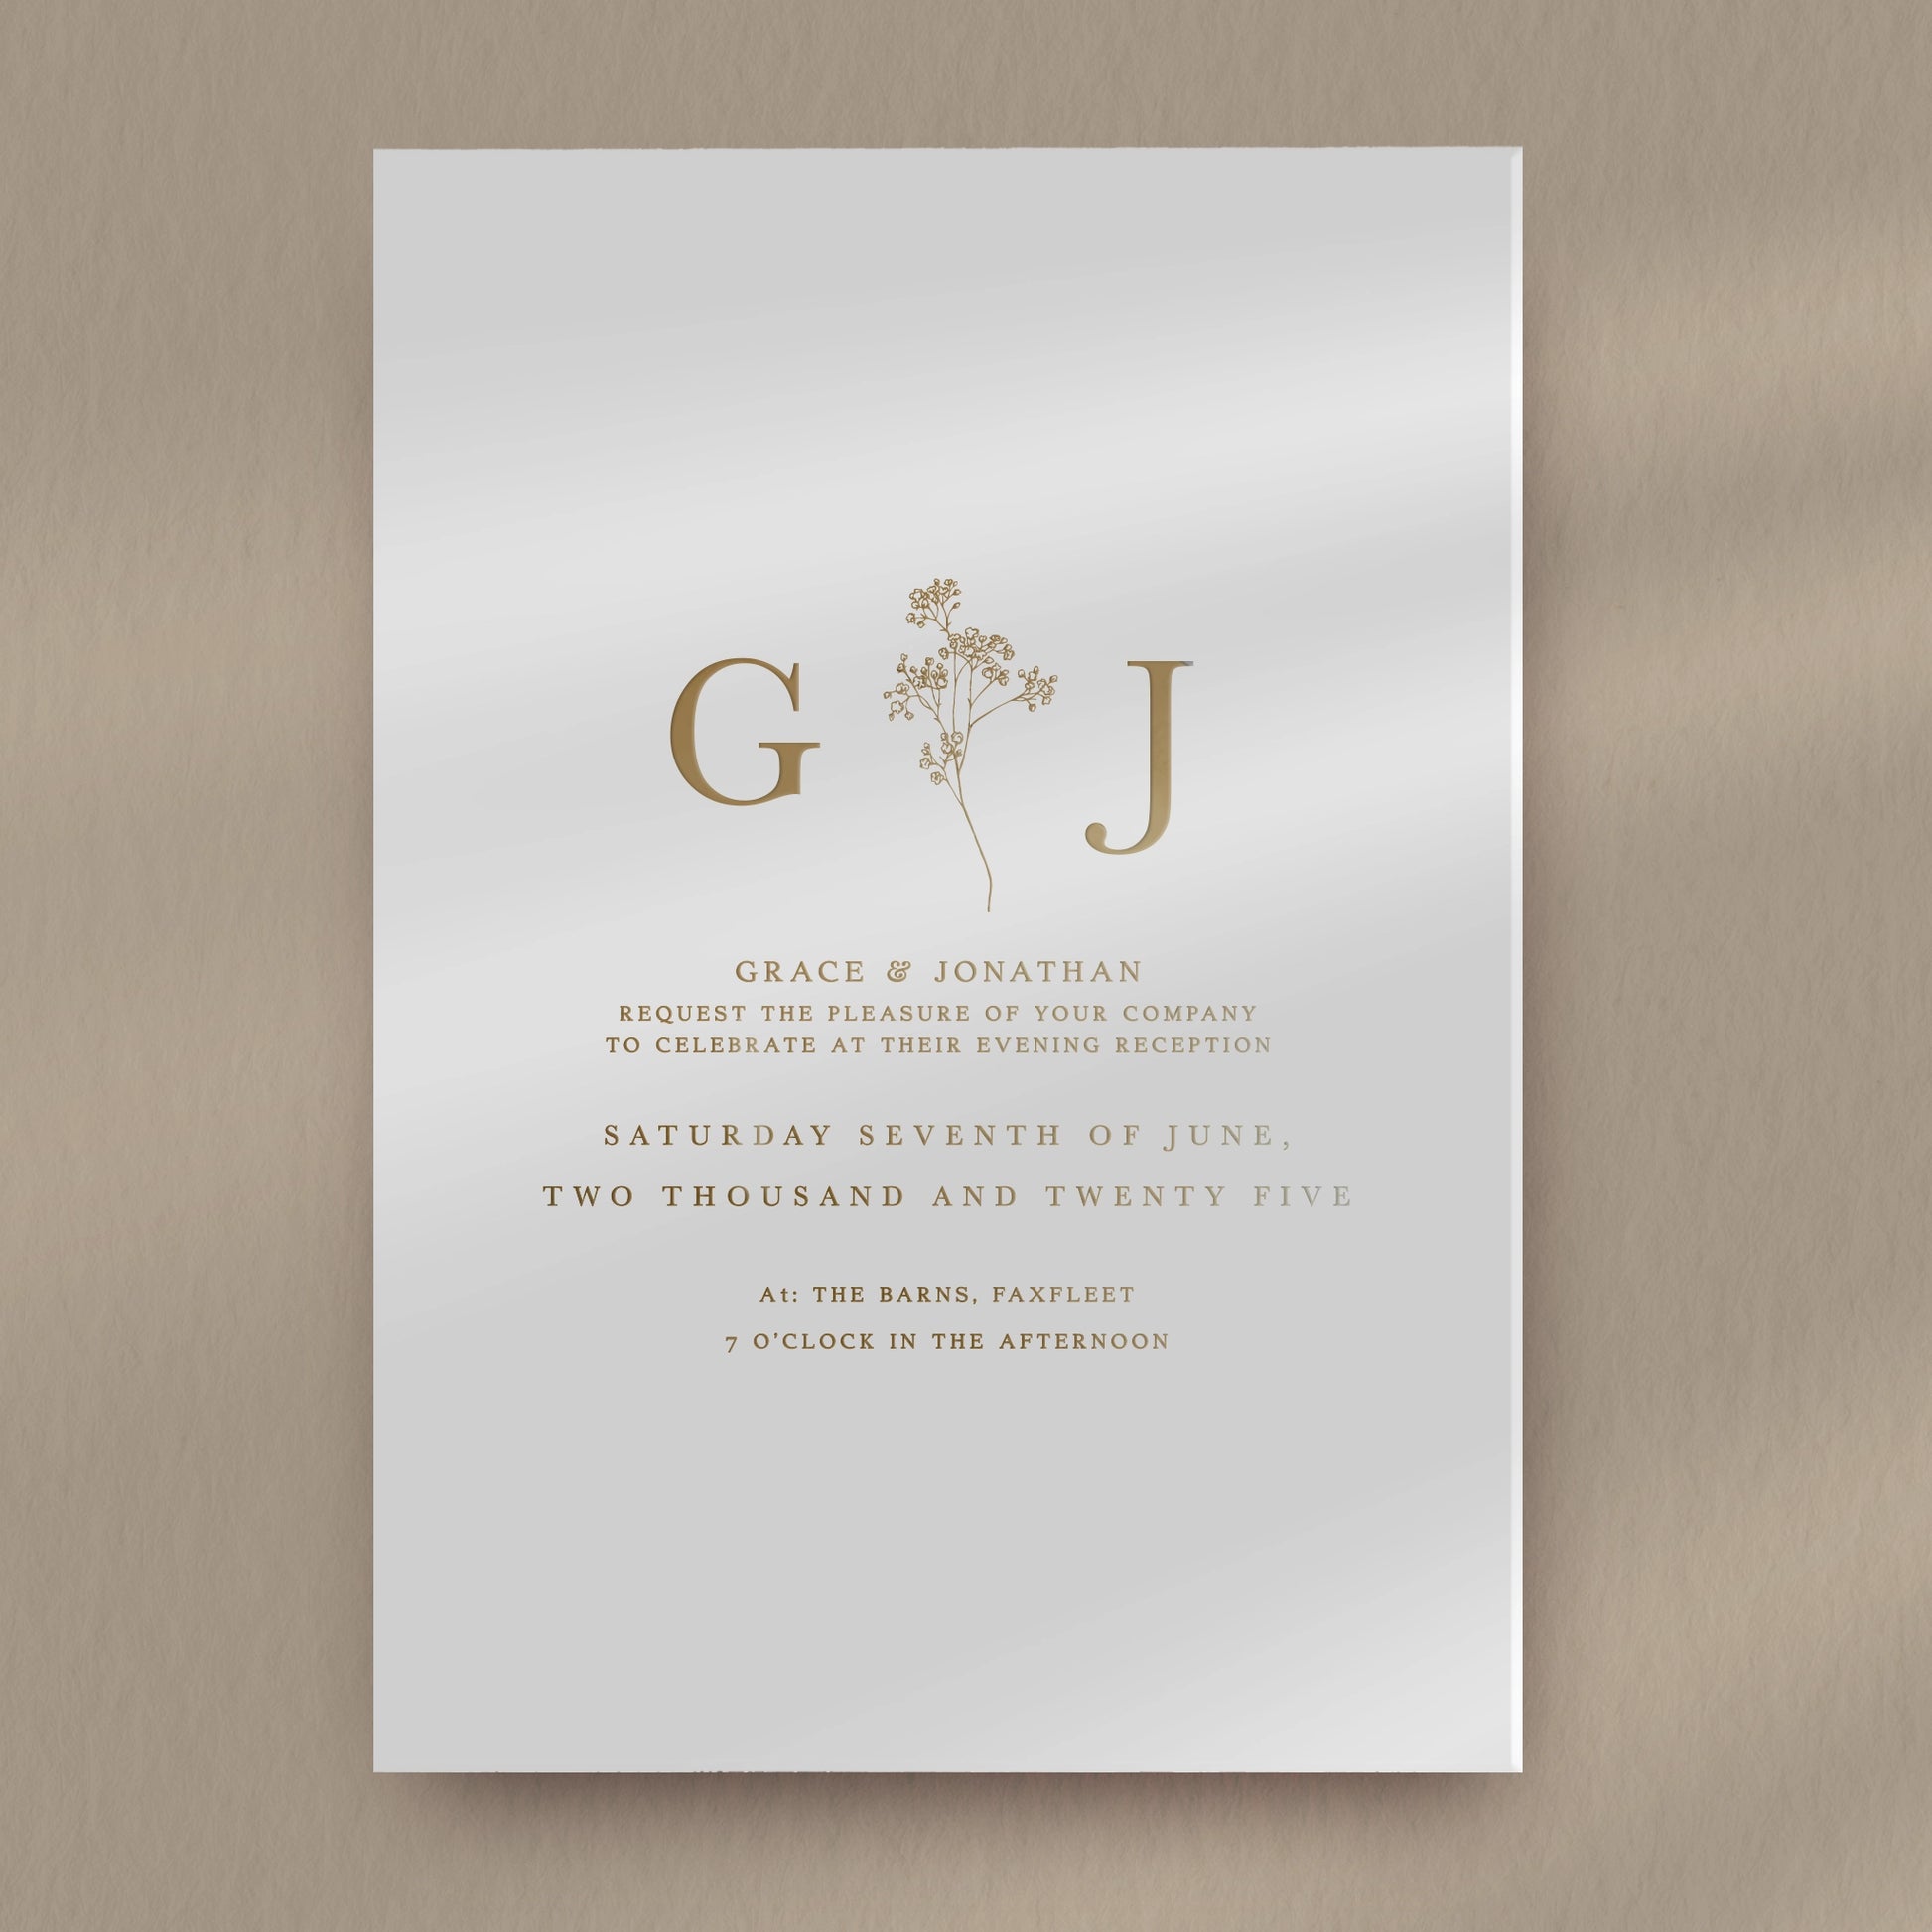 Evening Invitation Sample  Ivy and Gold Wedding Stationery Grace  